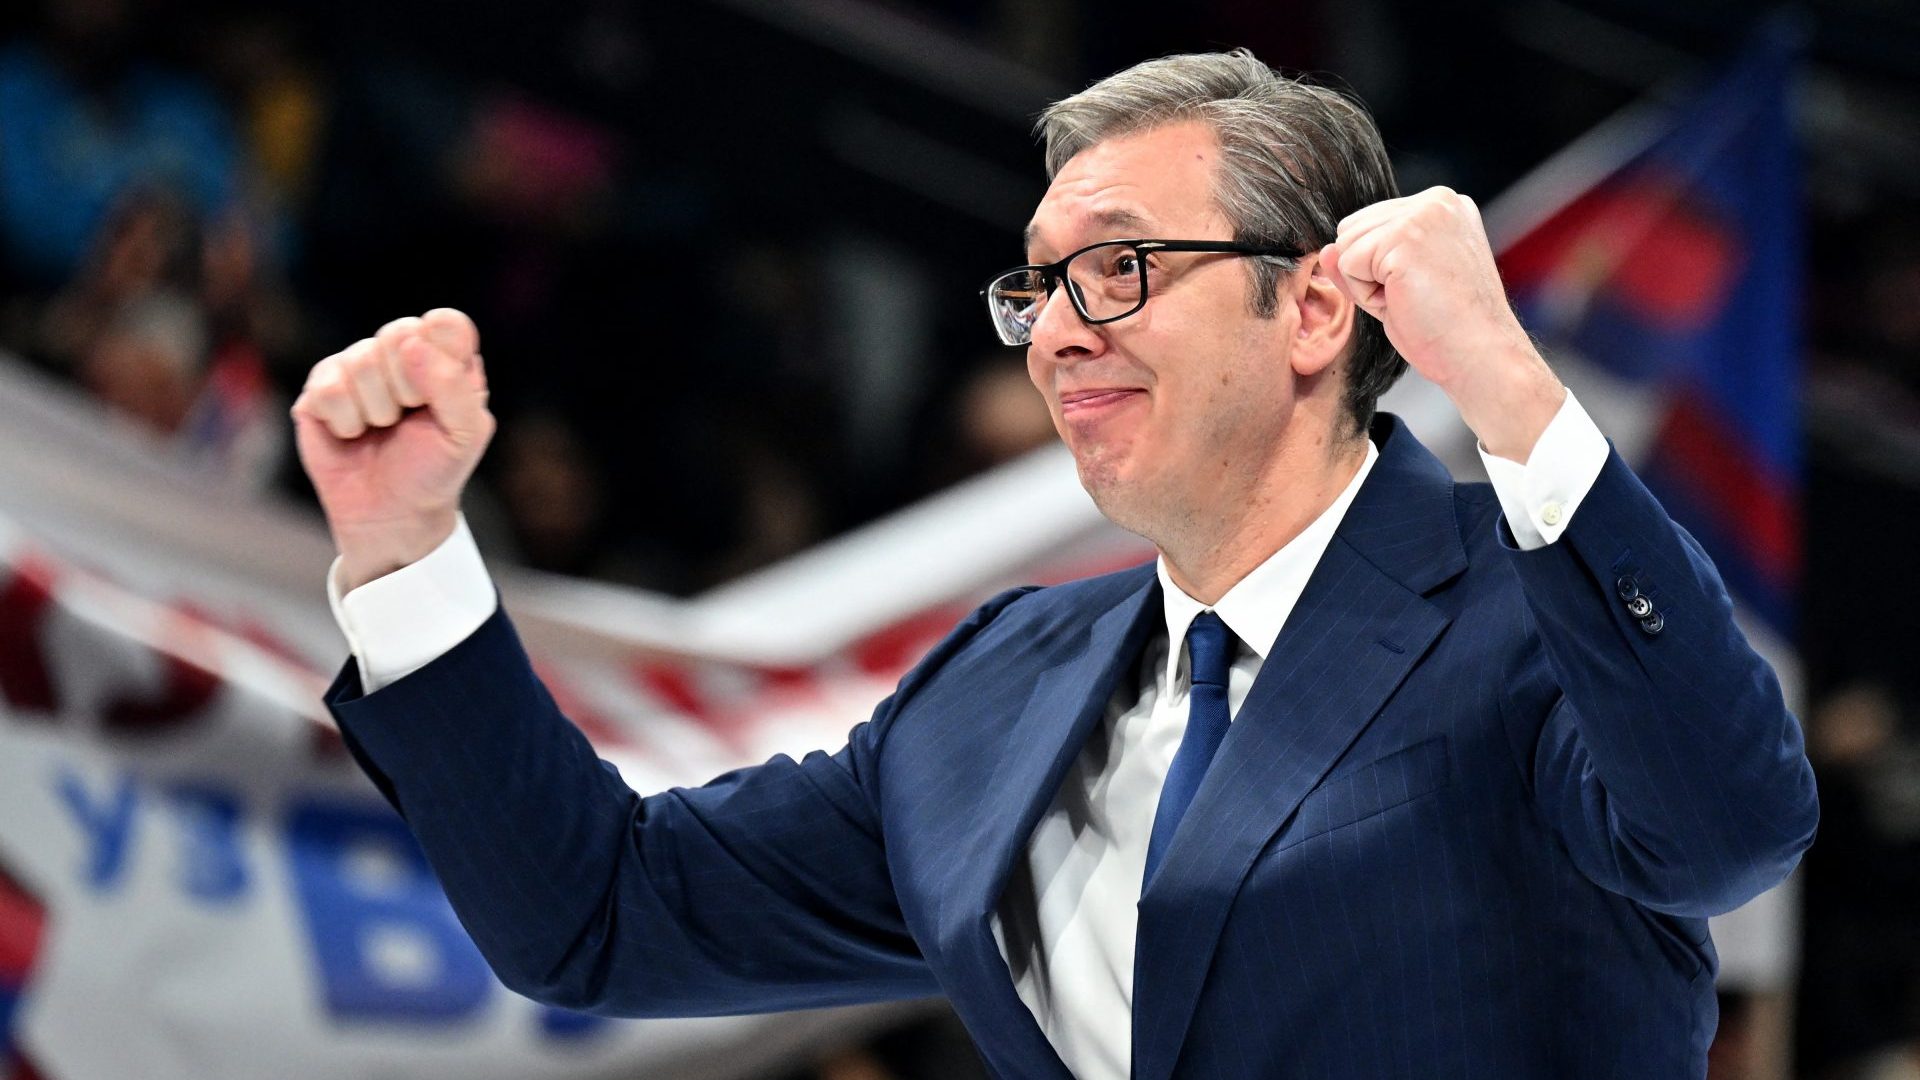 Serbian President Aleksandar Vucic gestures during a political rally of the Serbian Progressive Party (SNS) at the Stark Arena in Belgrade on December 2, 2023, ahead of the December 17 elections. Photo: ANDREJ ISAKOVIC/AFP via Getty Images